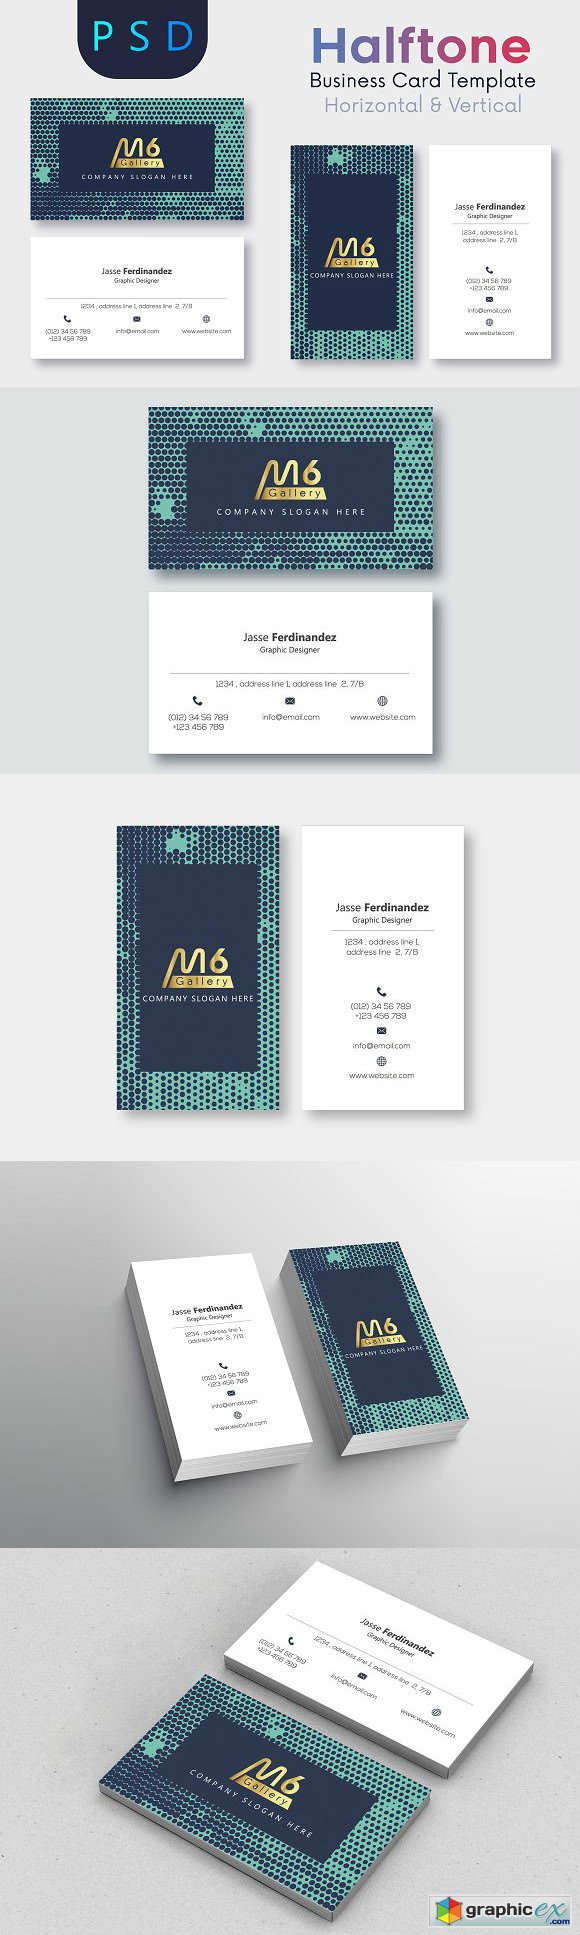 Halftone Business Card Template- S07